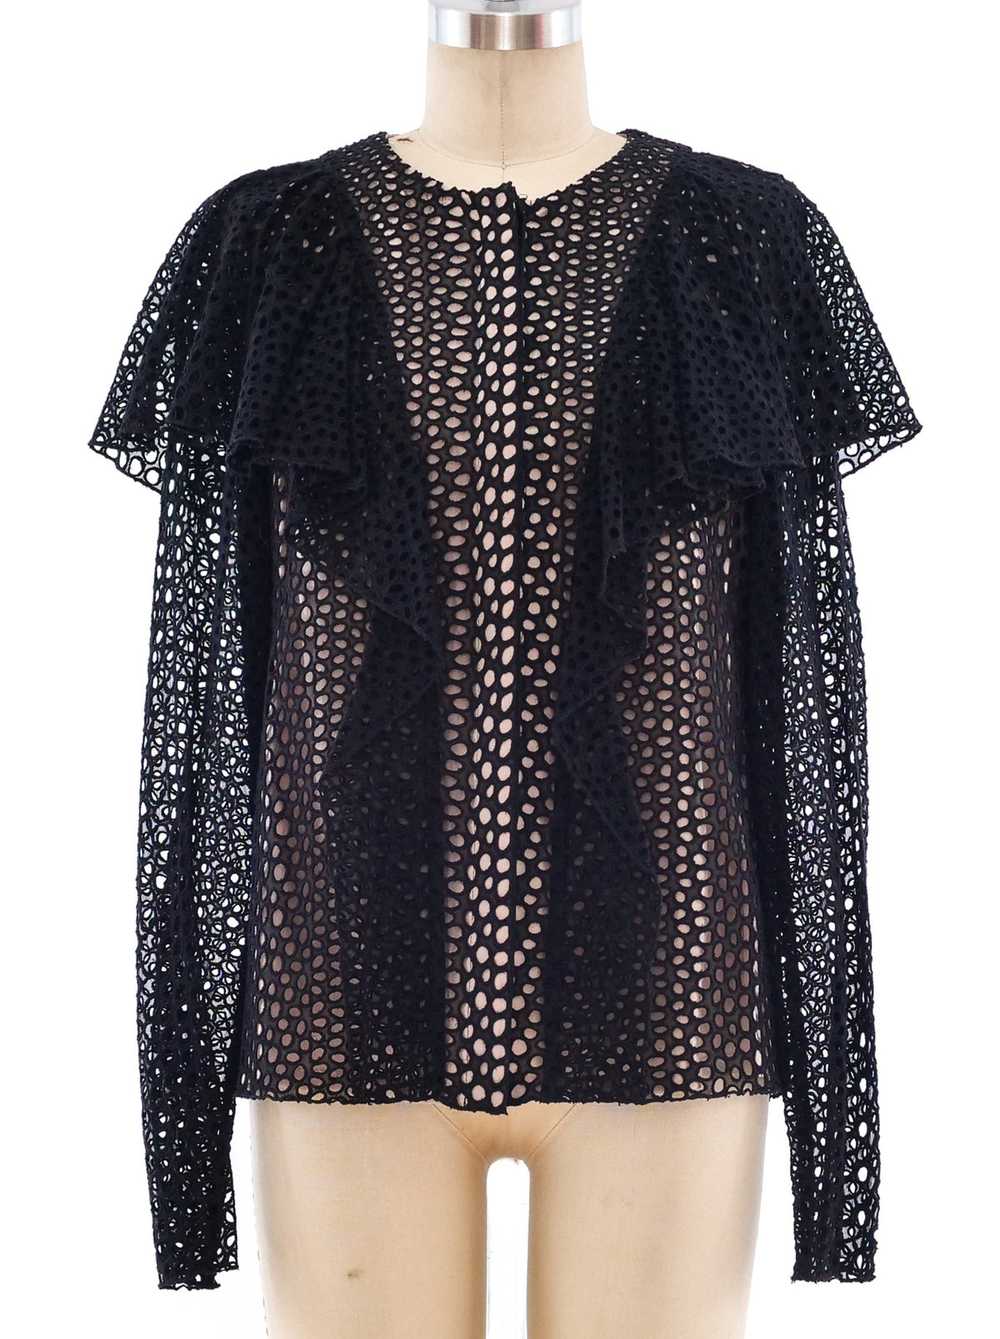 Lanvin Eyelet Button Front Top - image 1